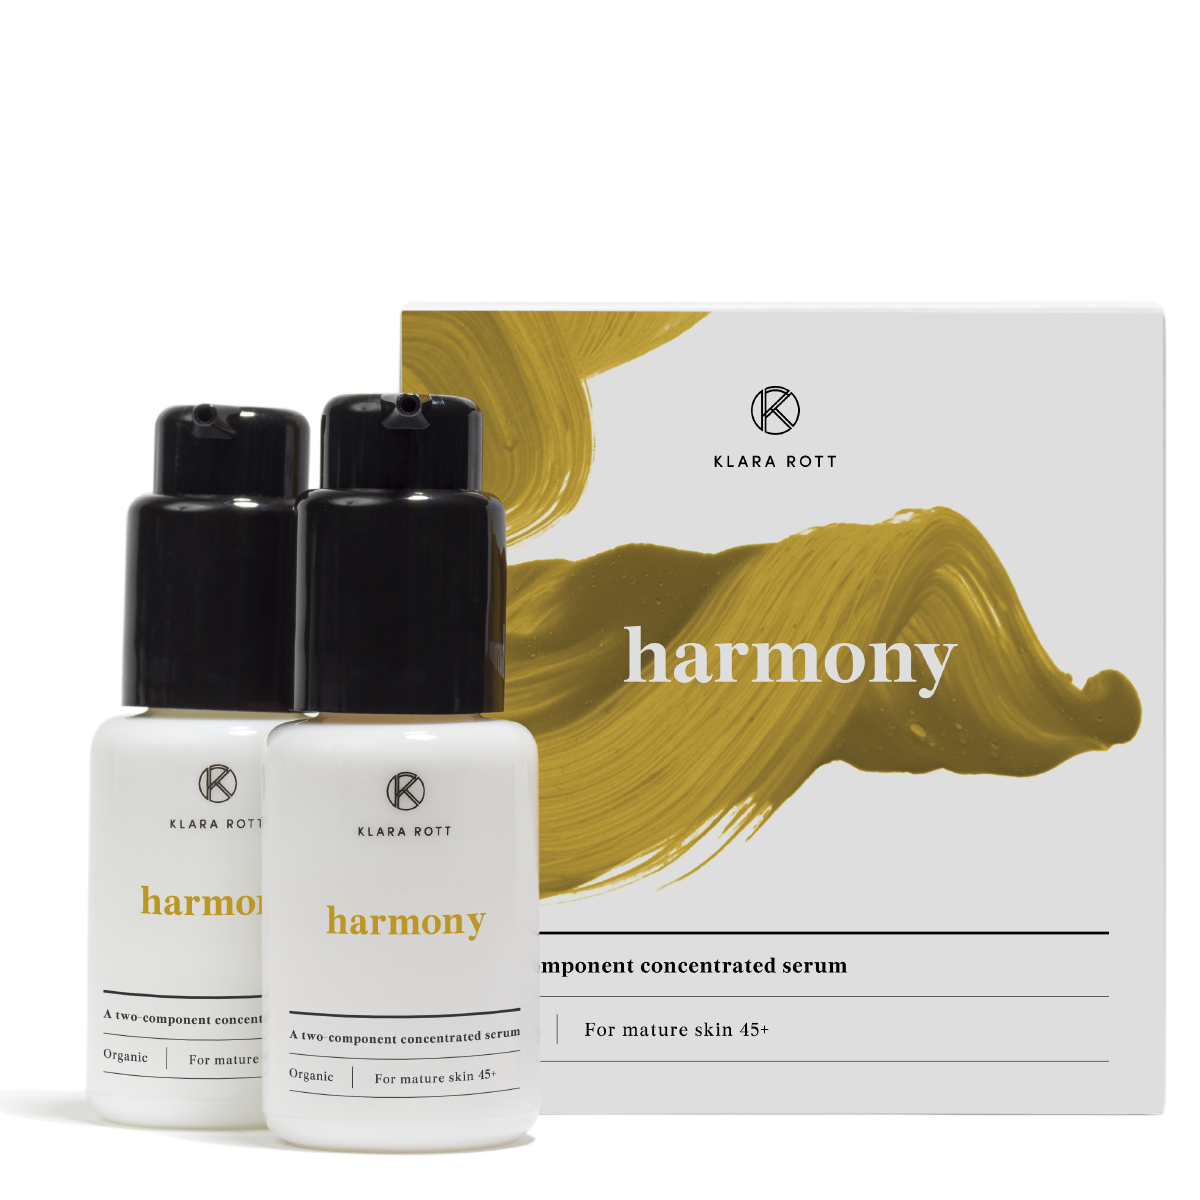 Harmony - Two-component concentrated serum for mature skin 